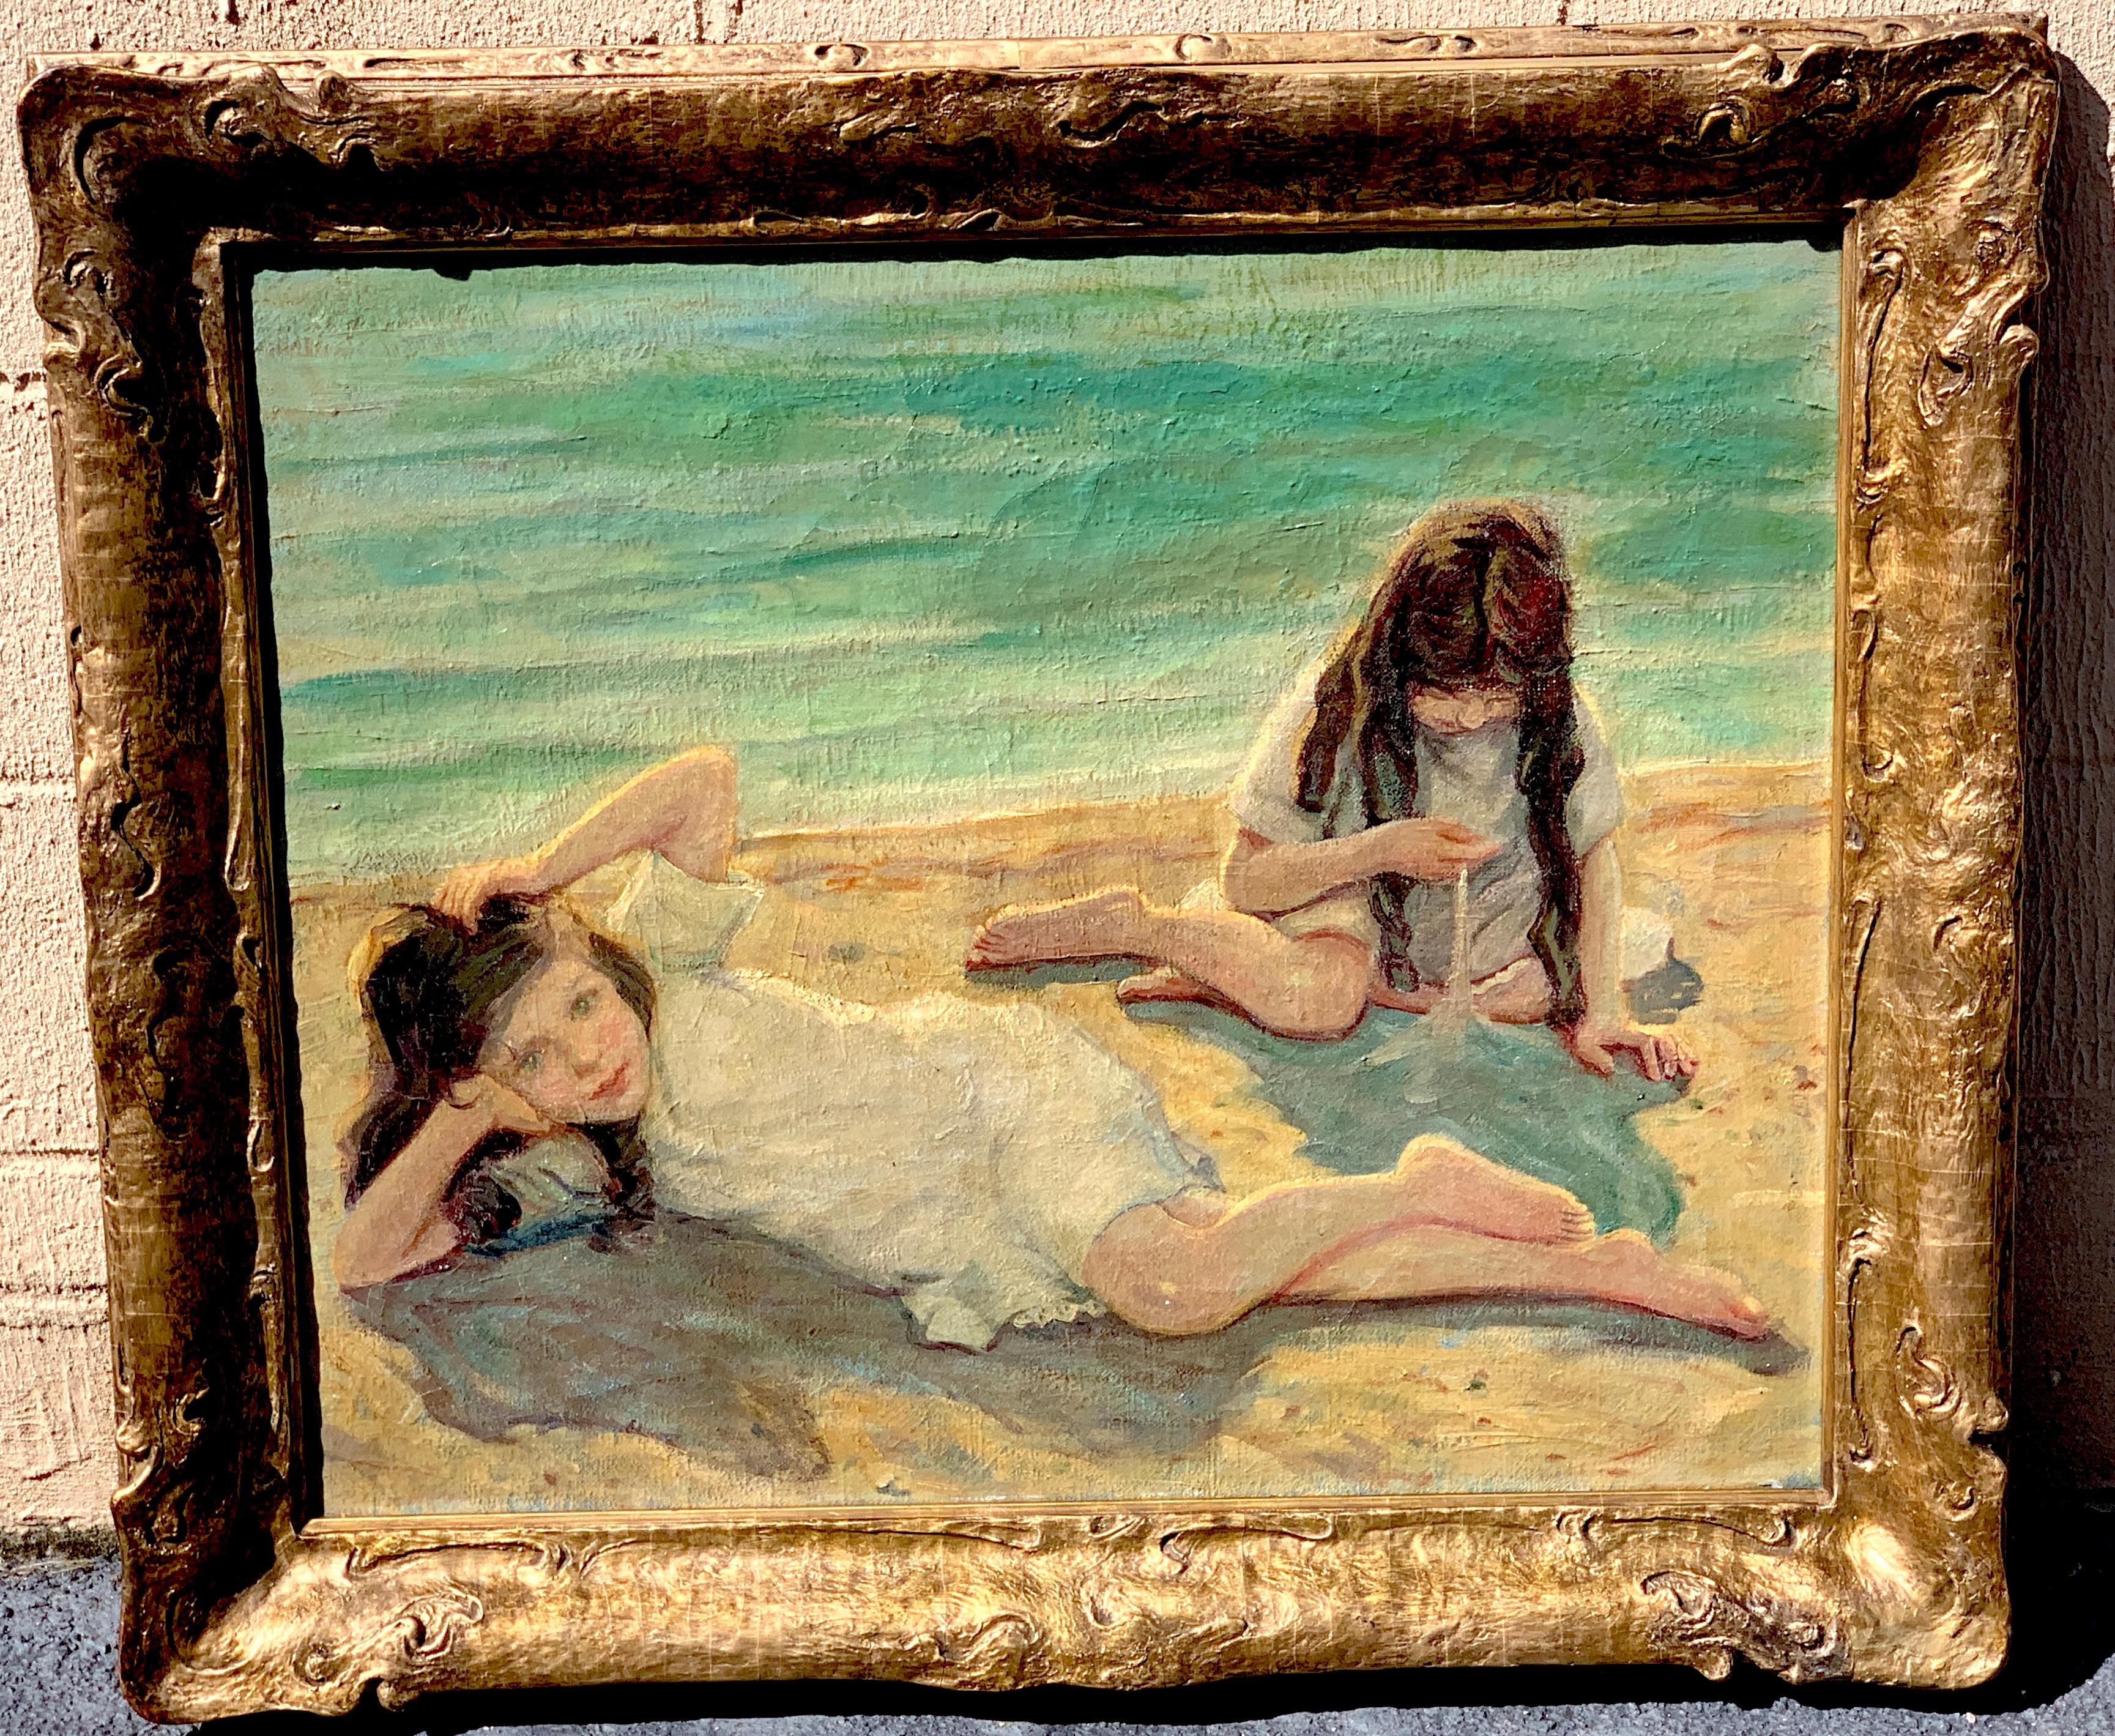 19th century oil on canvas children playing on the beach, a well executed work, unsigned, beautifully executed.
Measures: Canvas 30